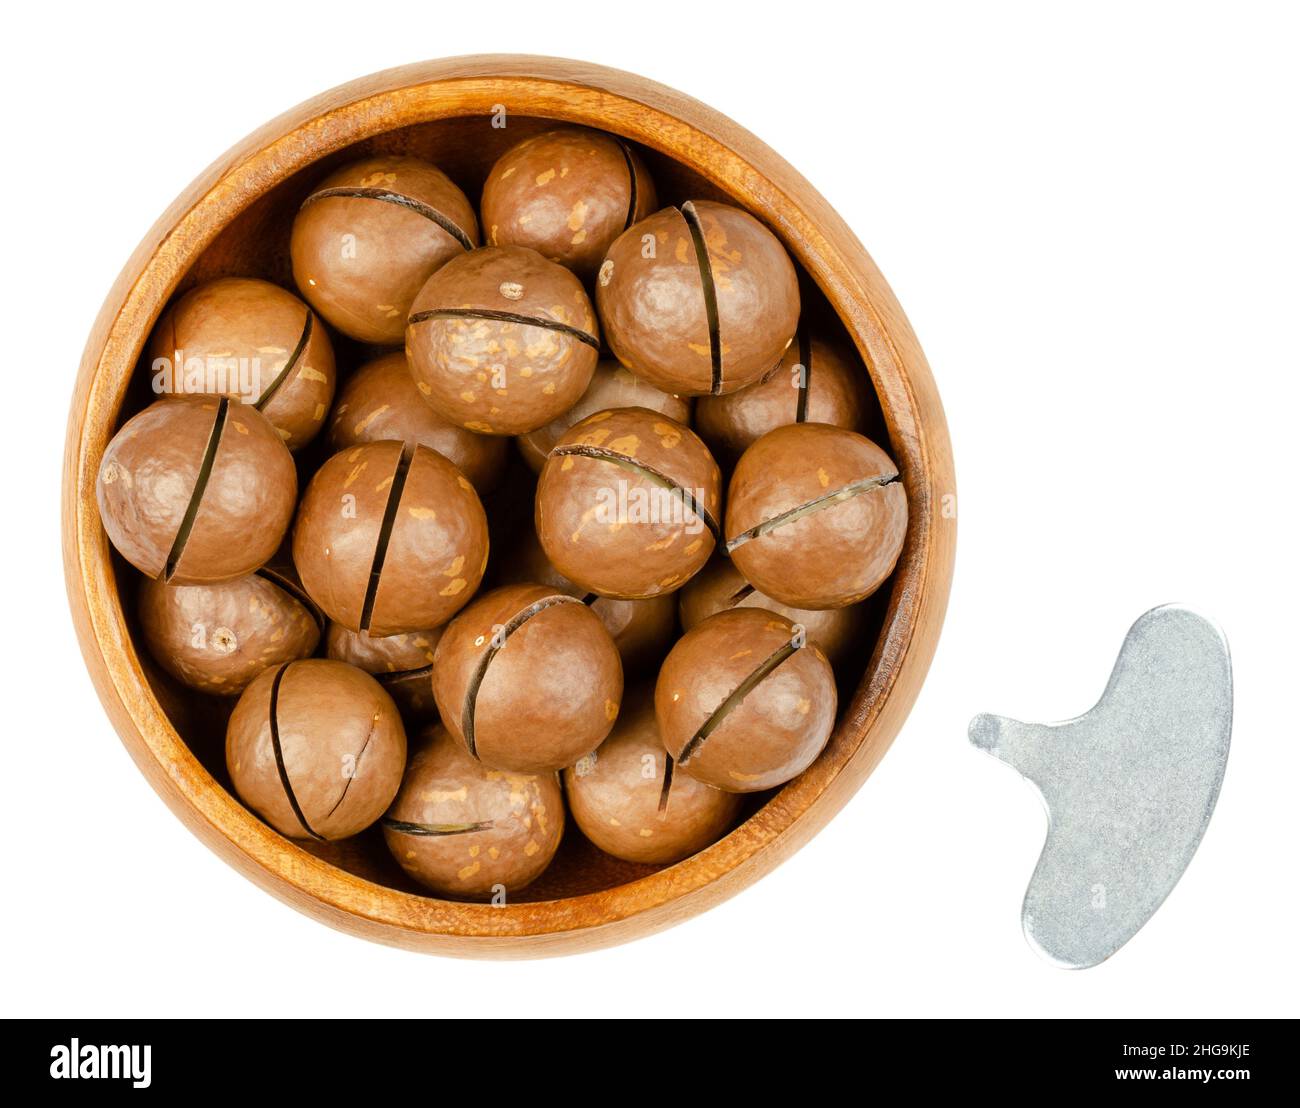 Macadamia nuts with sawn nutshells in a wooden bowl, and with opener key. Group of dried, unshelled nuts, known as Queensland, bush and maroochi nuts. Stock Photo